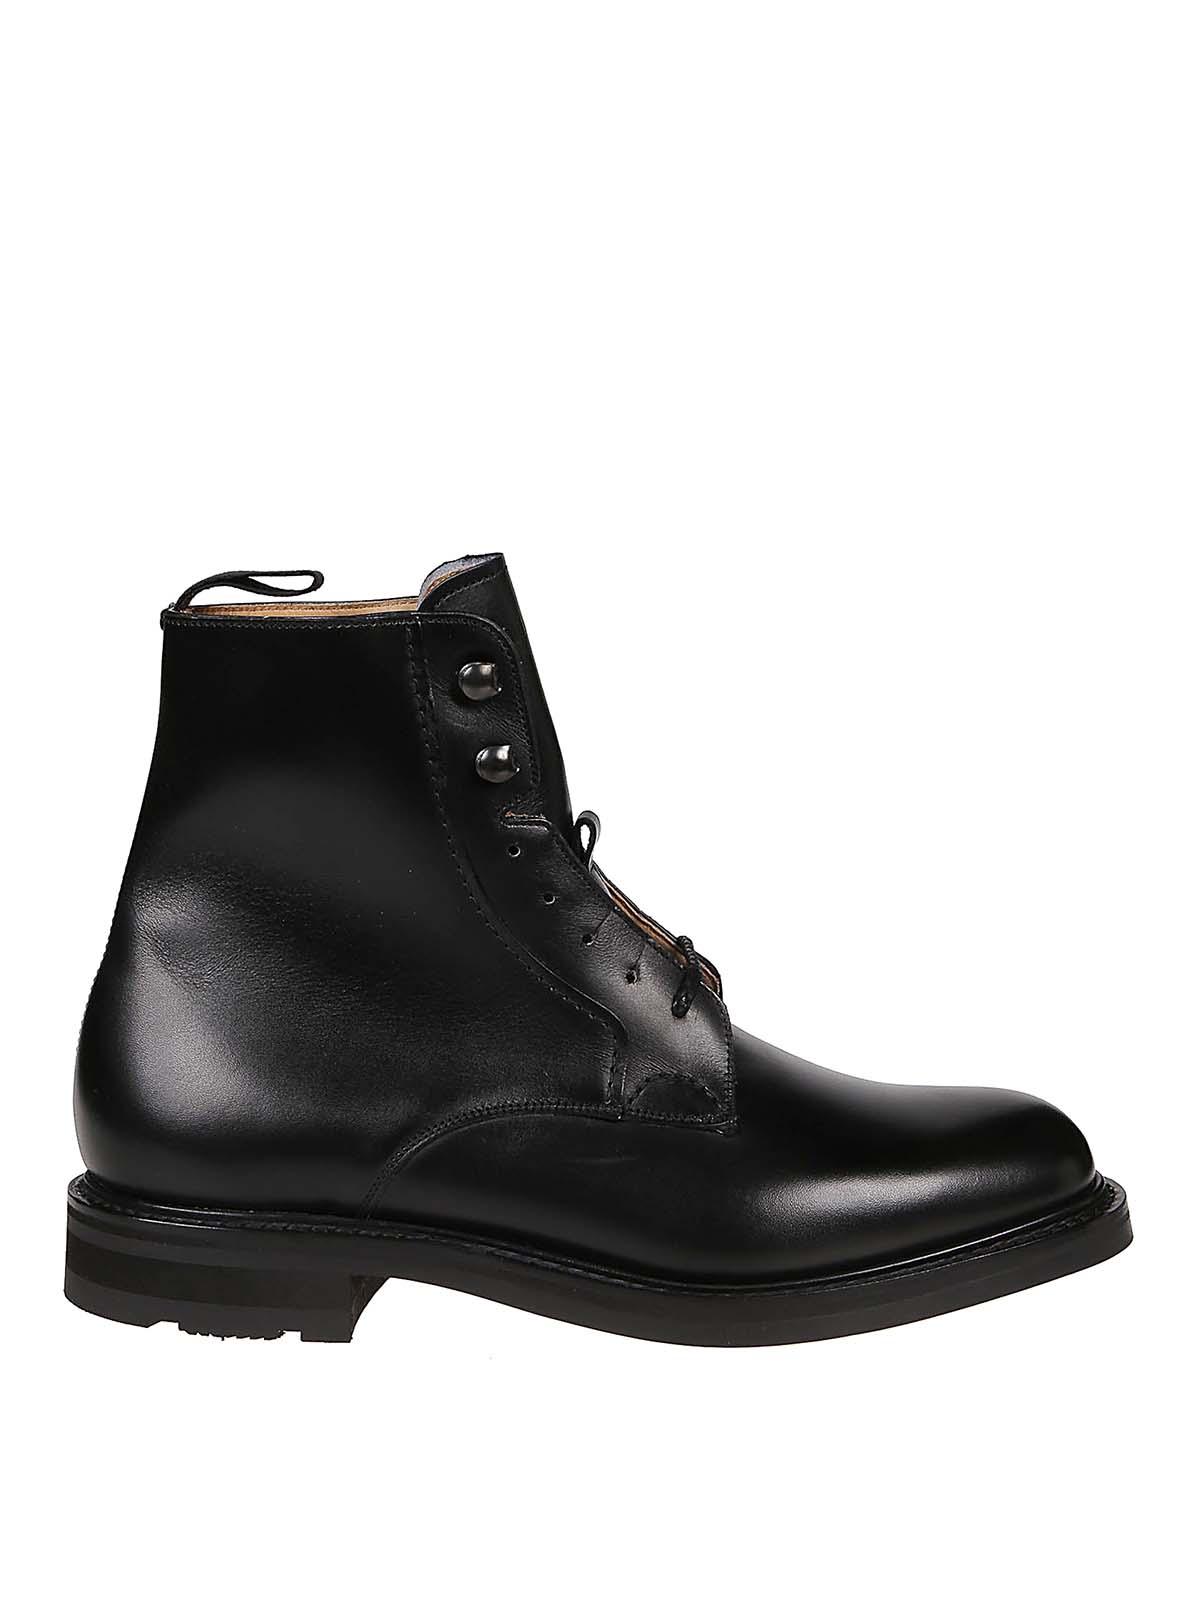 Wootton black ankle boots - ankle boots 